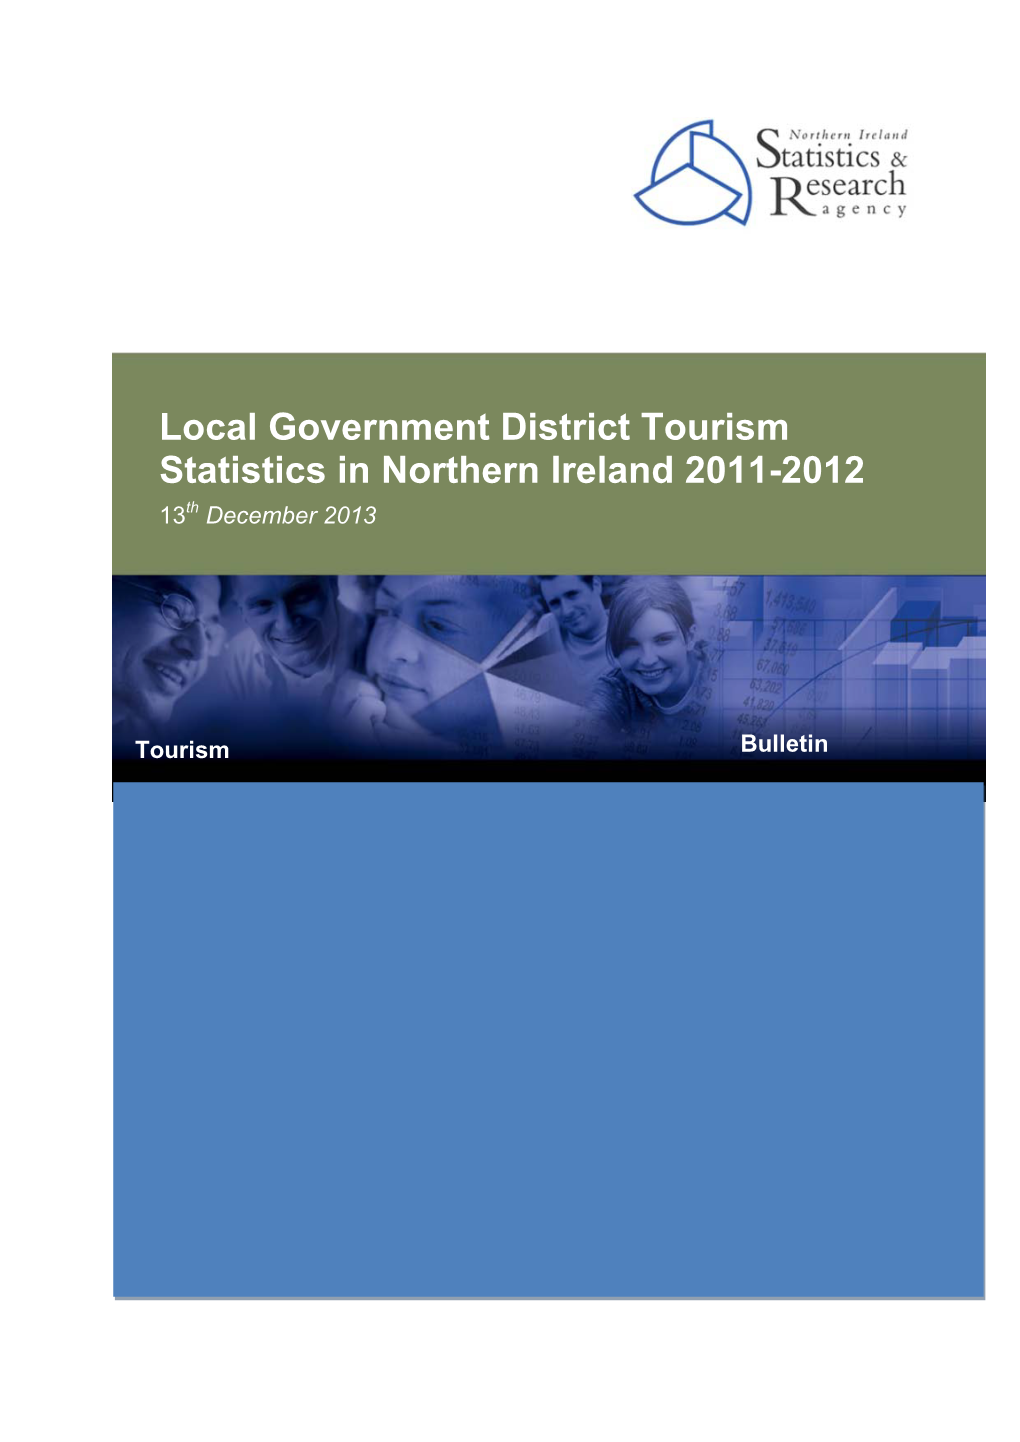 Local Government District Tourism Statistics in Northern Ireland 2011-2012 13Th December 2013